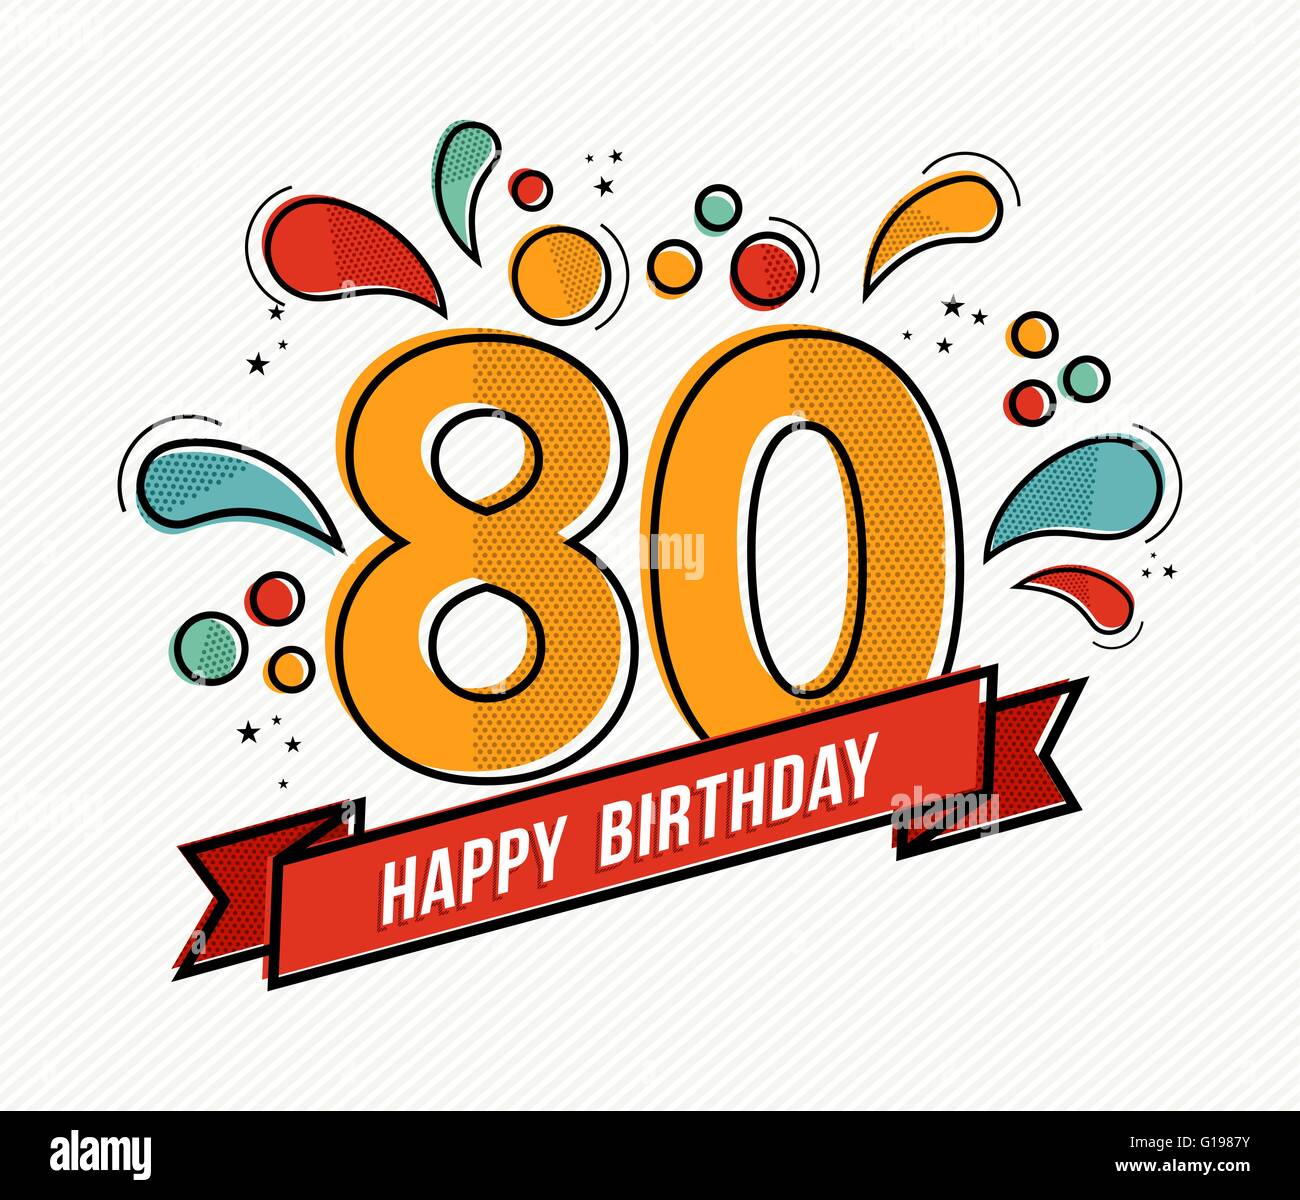 Happy birthday number 80, greeting card for eighty year in modern flat line art with colorful geometric shapes. Stock Vector